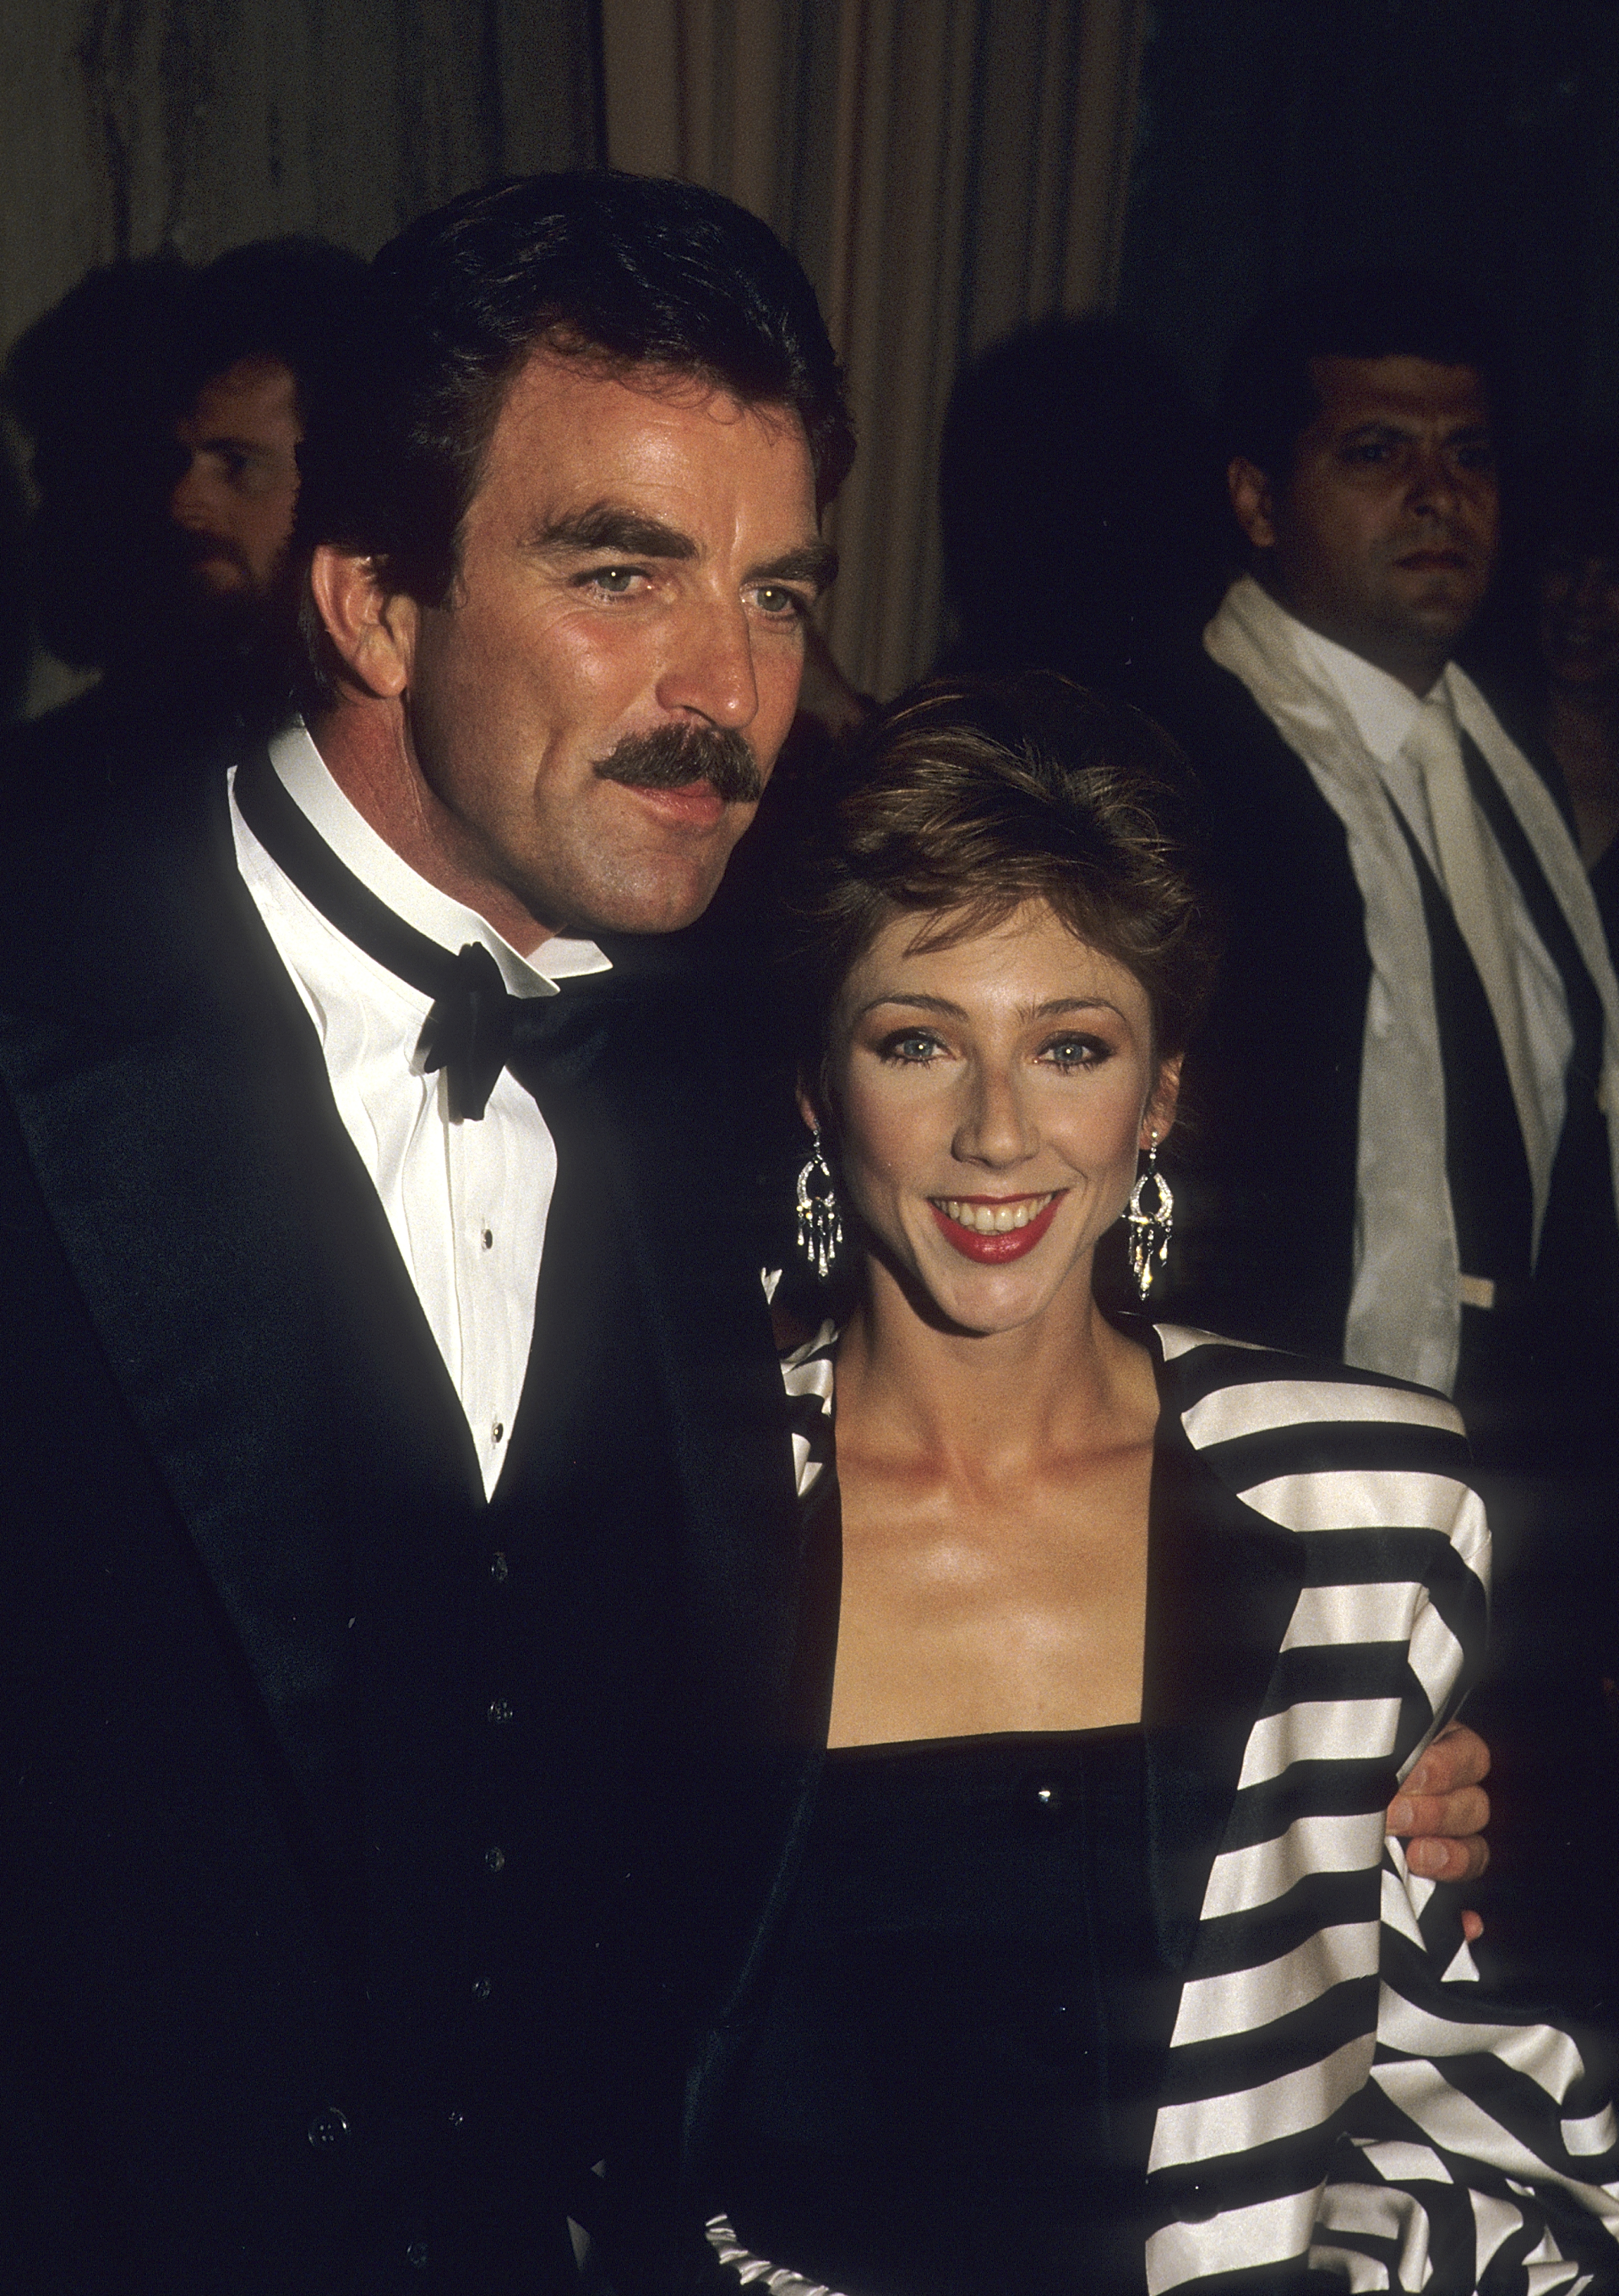 Tom Selleck and Jillie Mack attend the 44th Annual Golden Globe Awards in Beverly Hills, California on January 31, 1987. | Source: Getty Images